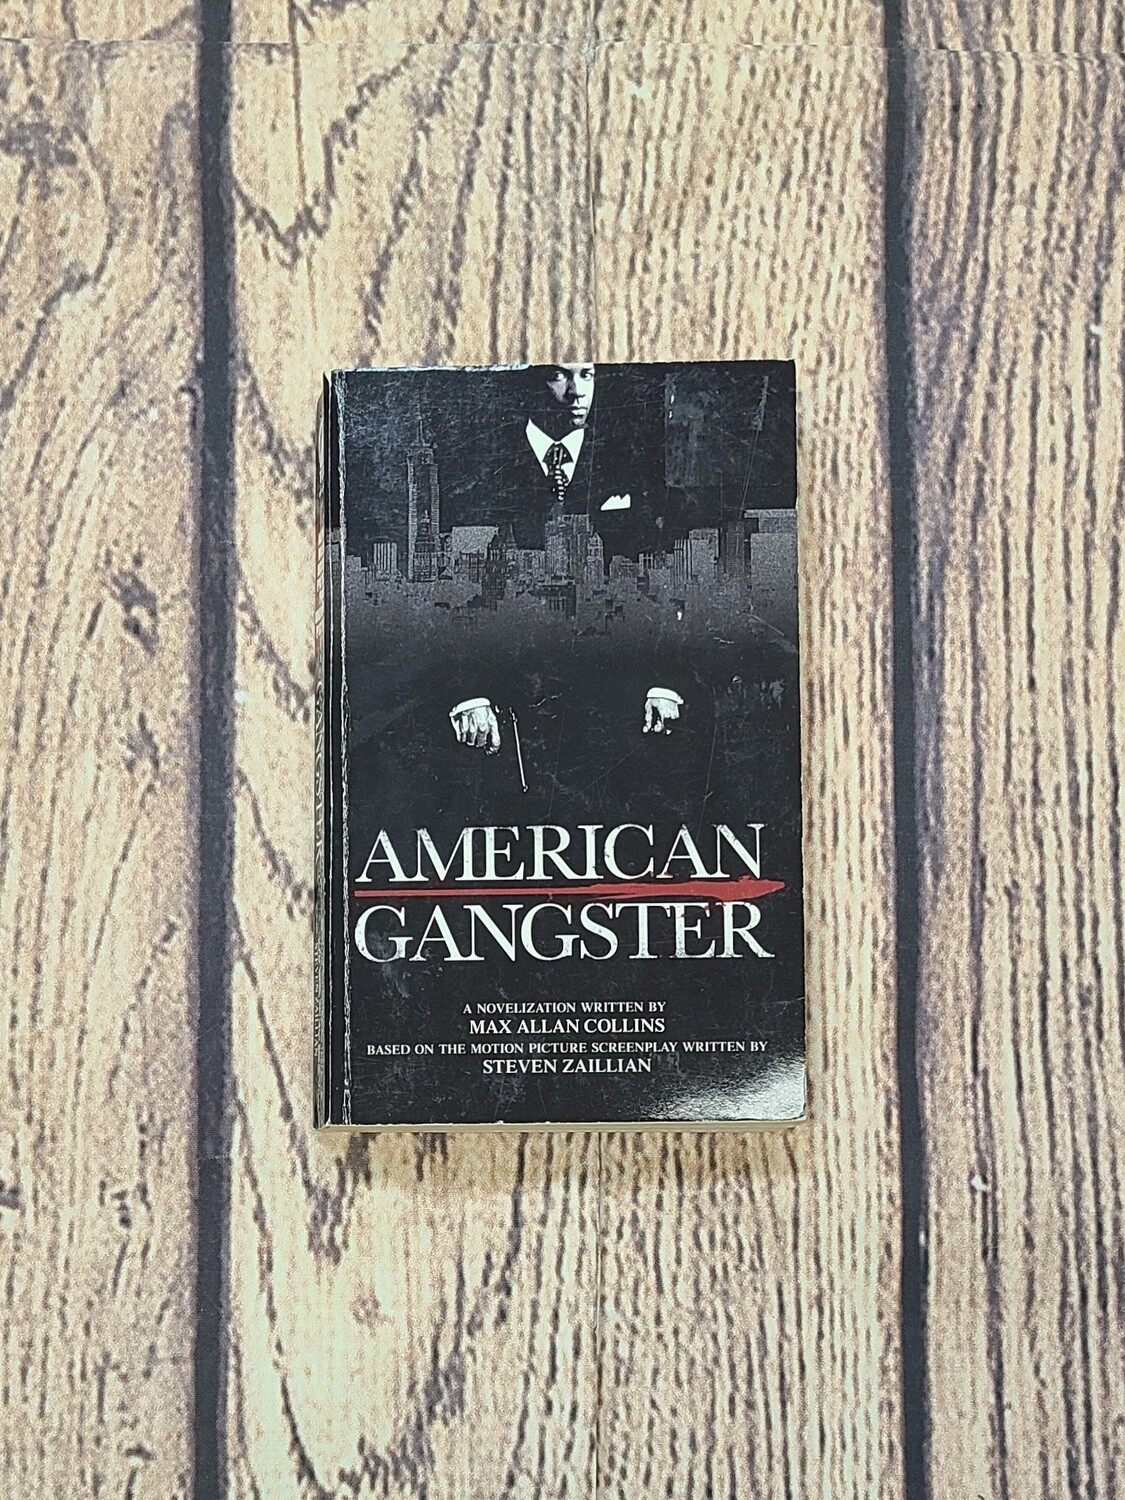 American Gangster by Max Allan Collins